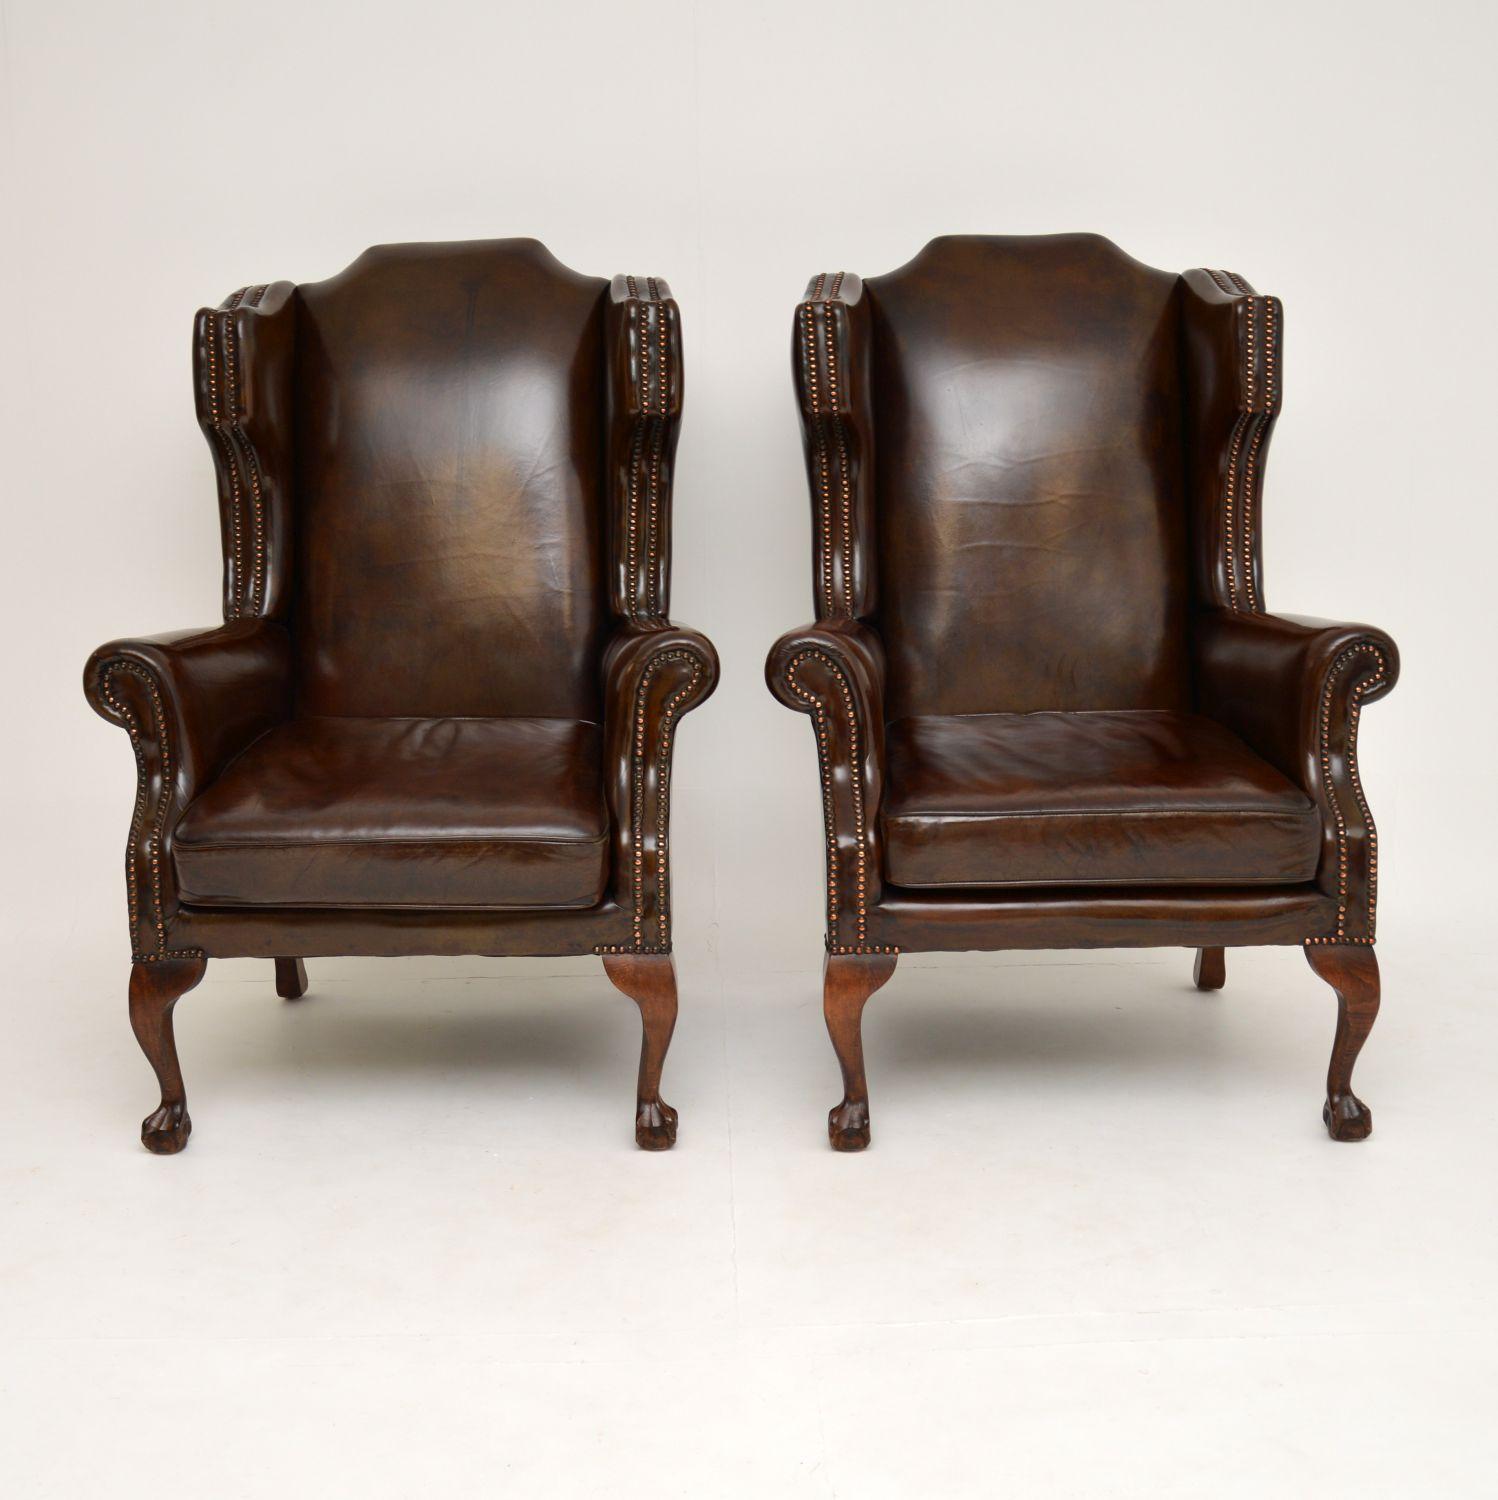 Georgian Pair of Antique Leather Wingback Armchairs